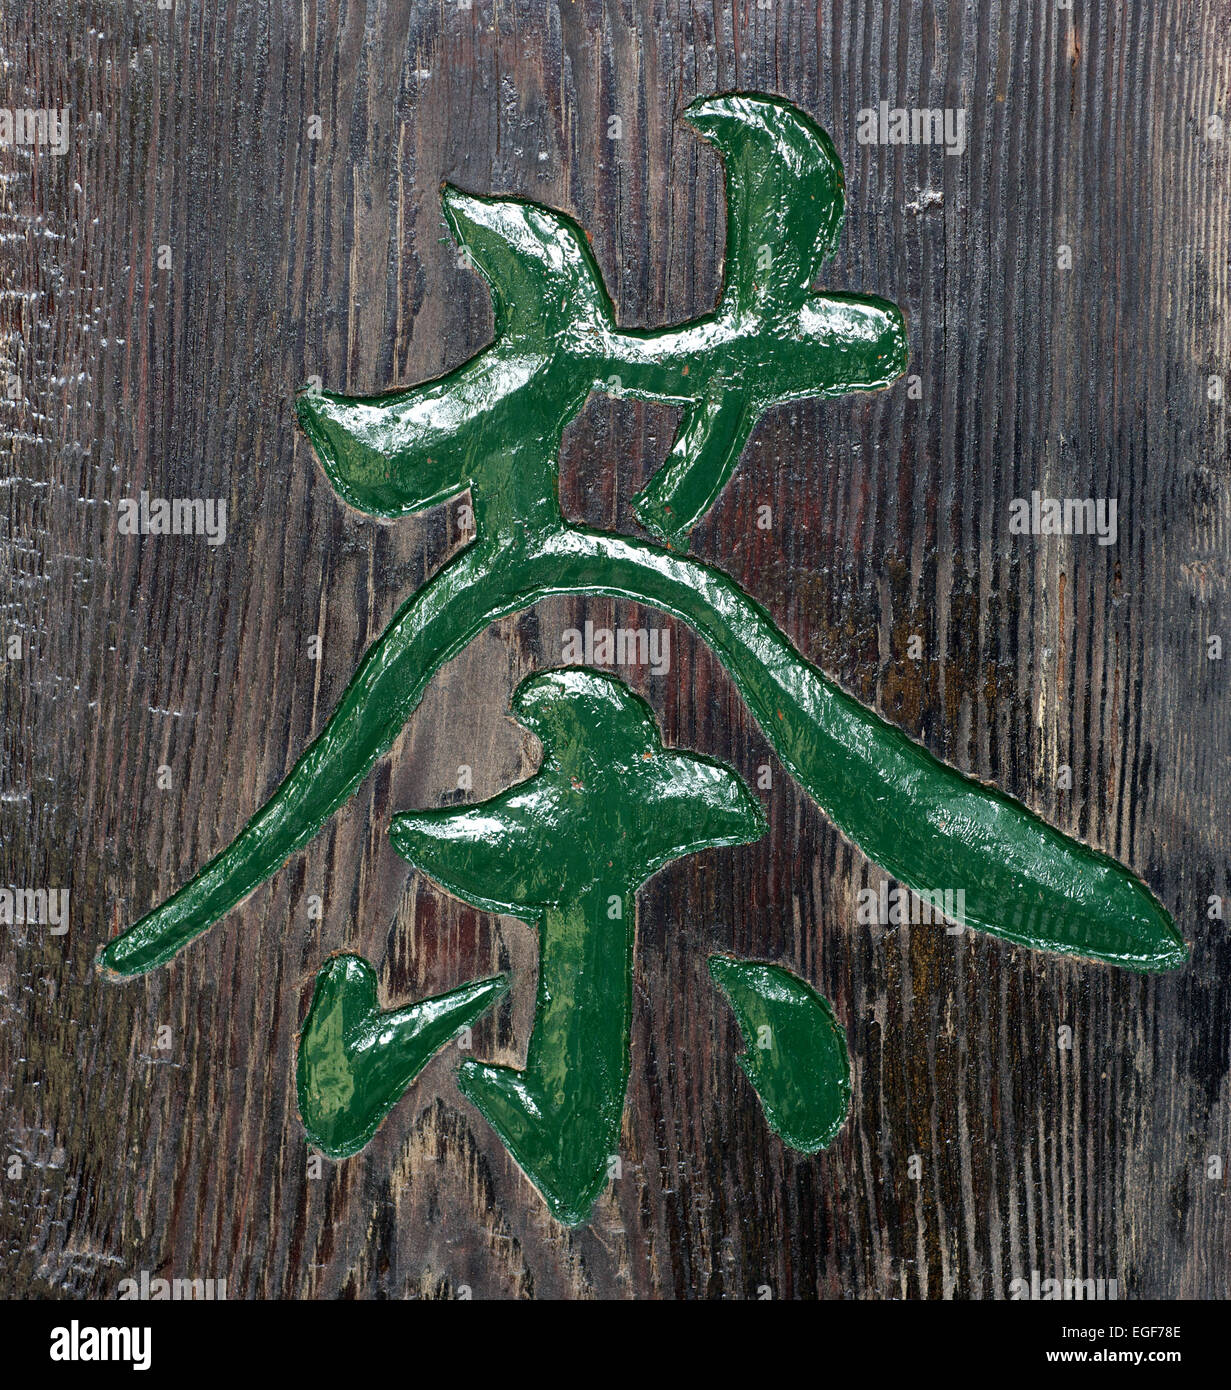 Green Chinese tea character carved in wood Stock Photo